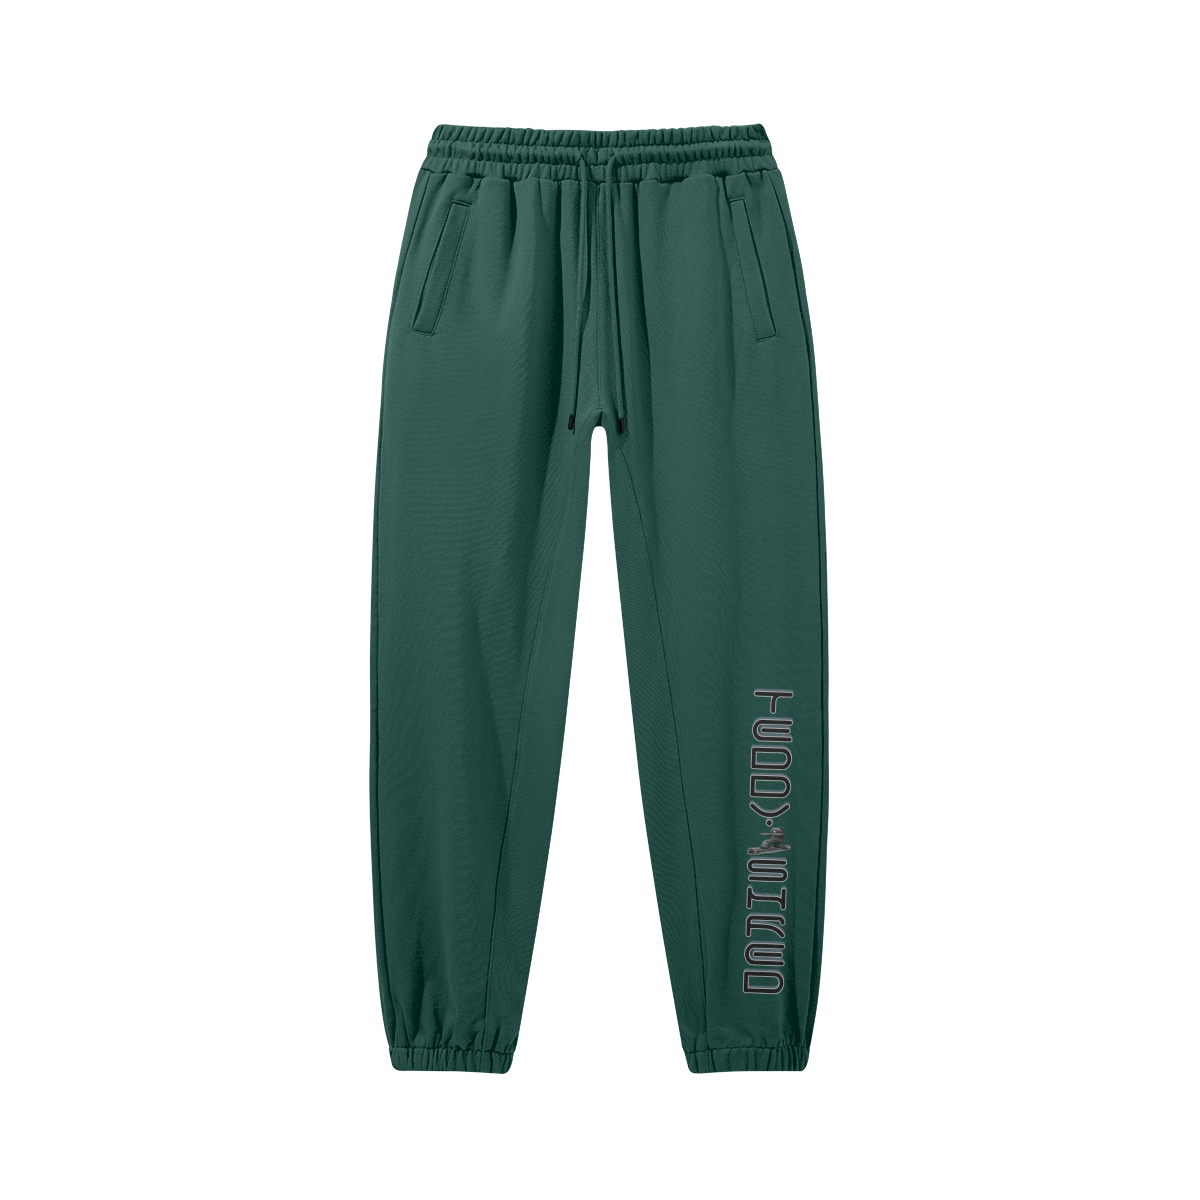 Mineral Green - Teddy Ride Shred 380GSM Unisex Heavyweight Baggy Sweatpants - unisex sweatpants at TFC&H Co.